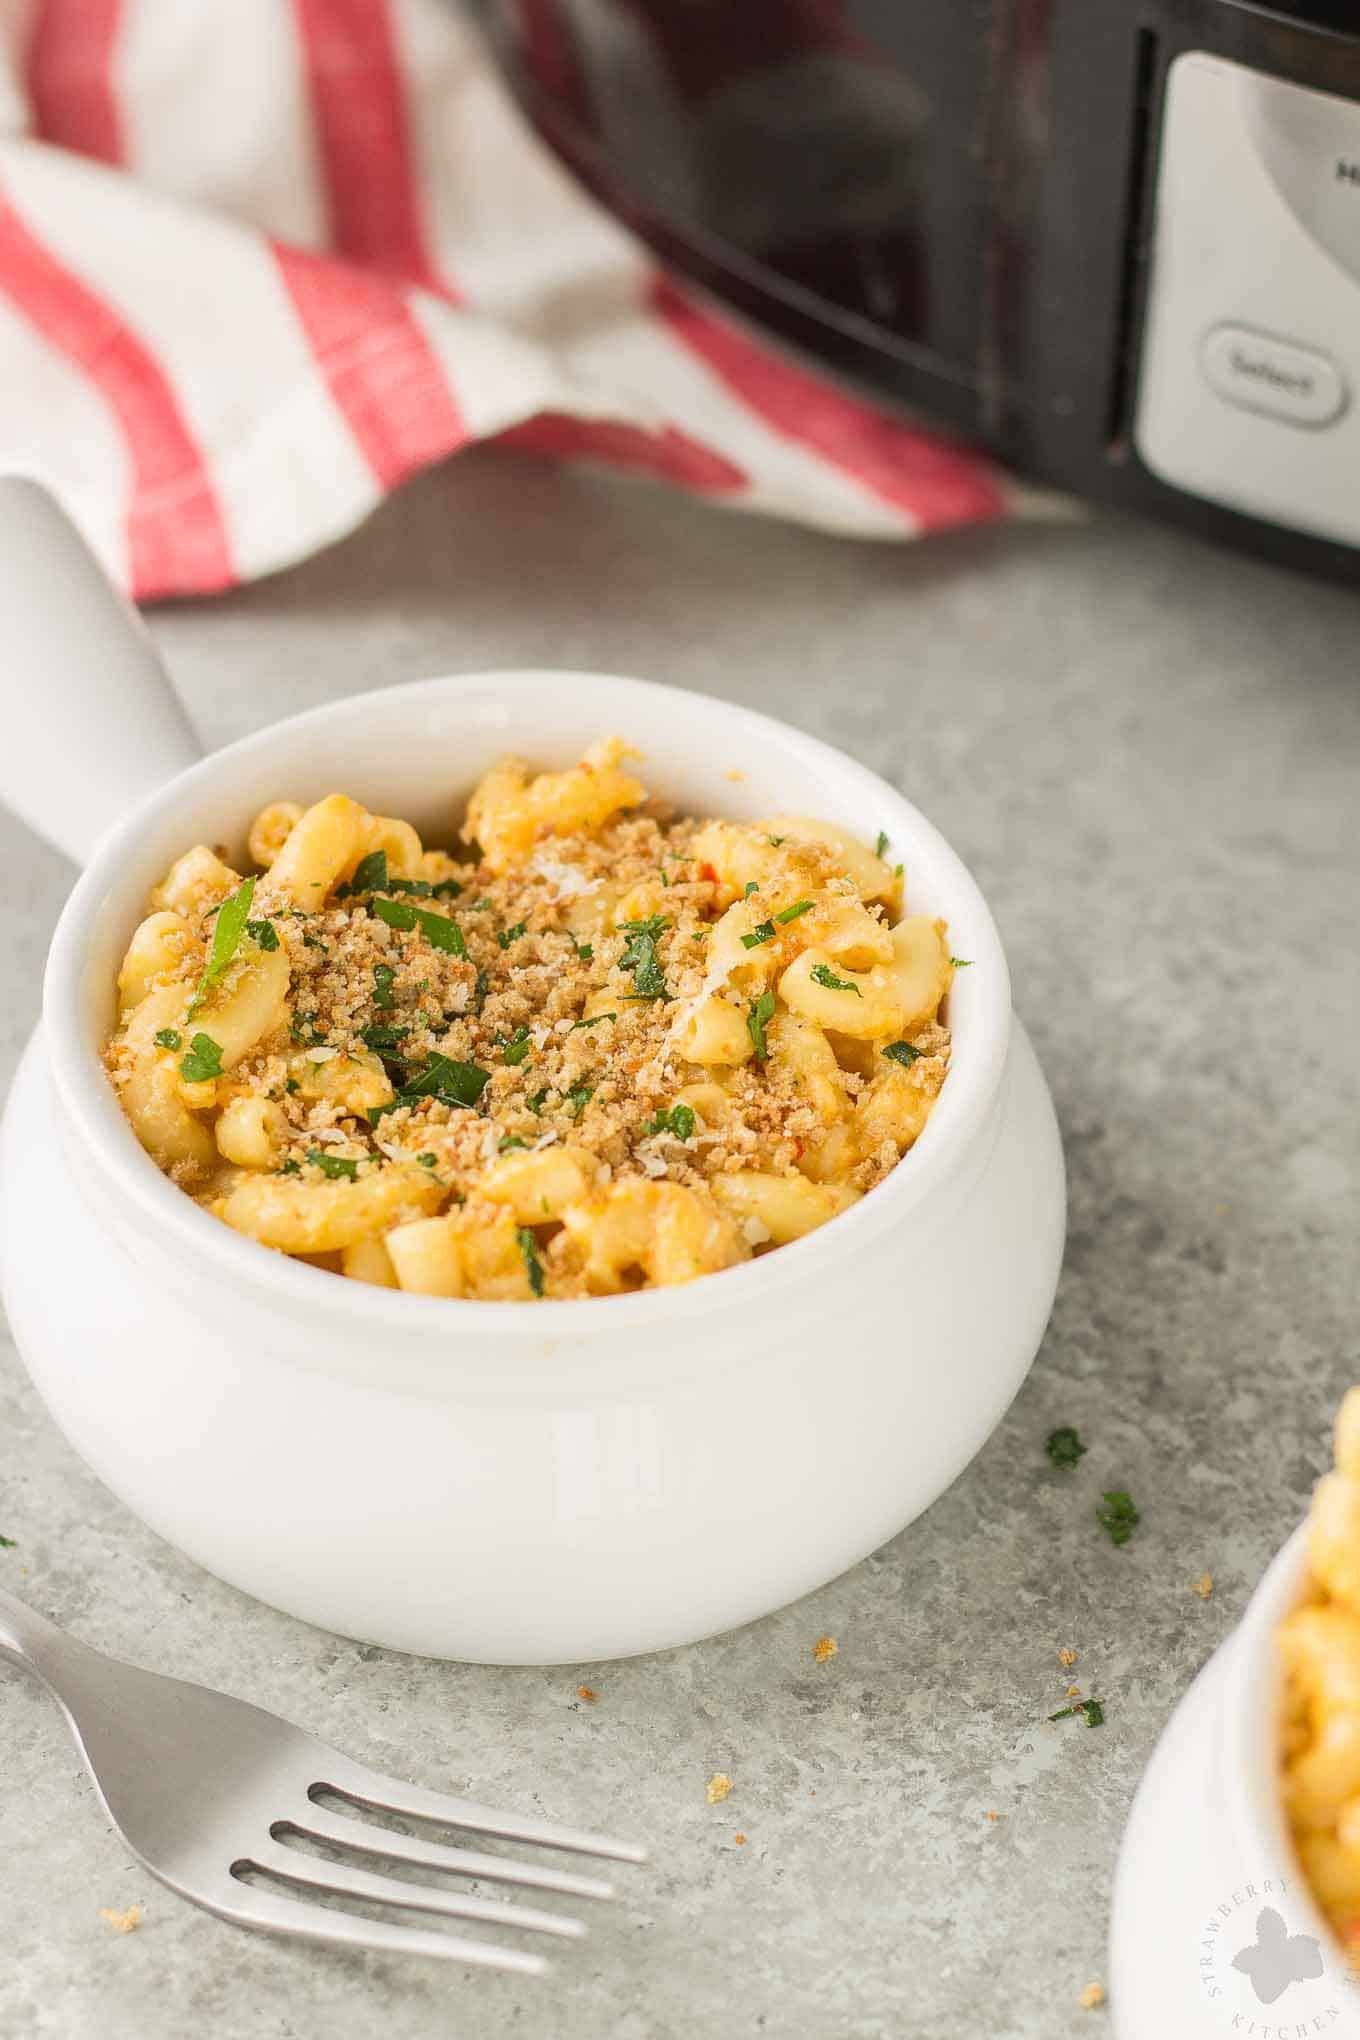 best slow cooker macaroni and cheese recipe